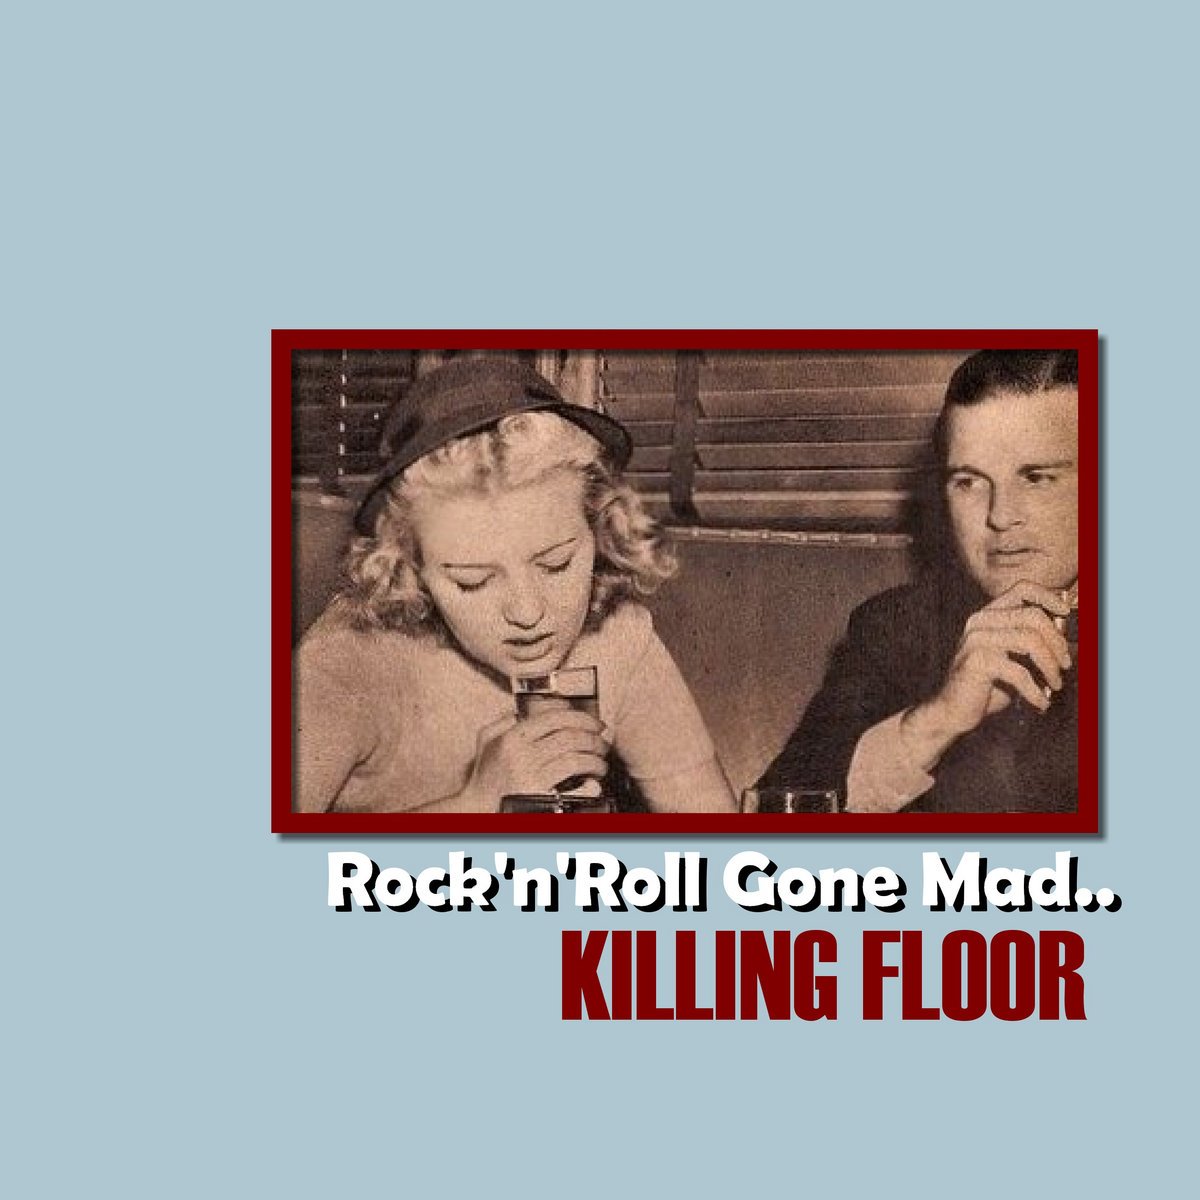 My life is to kill. Killing Floor - Rock'n'Roll gone Mad - (2012) - CD Covers. Gone Mad. Trouble in my Life.